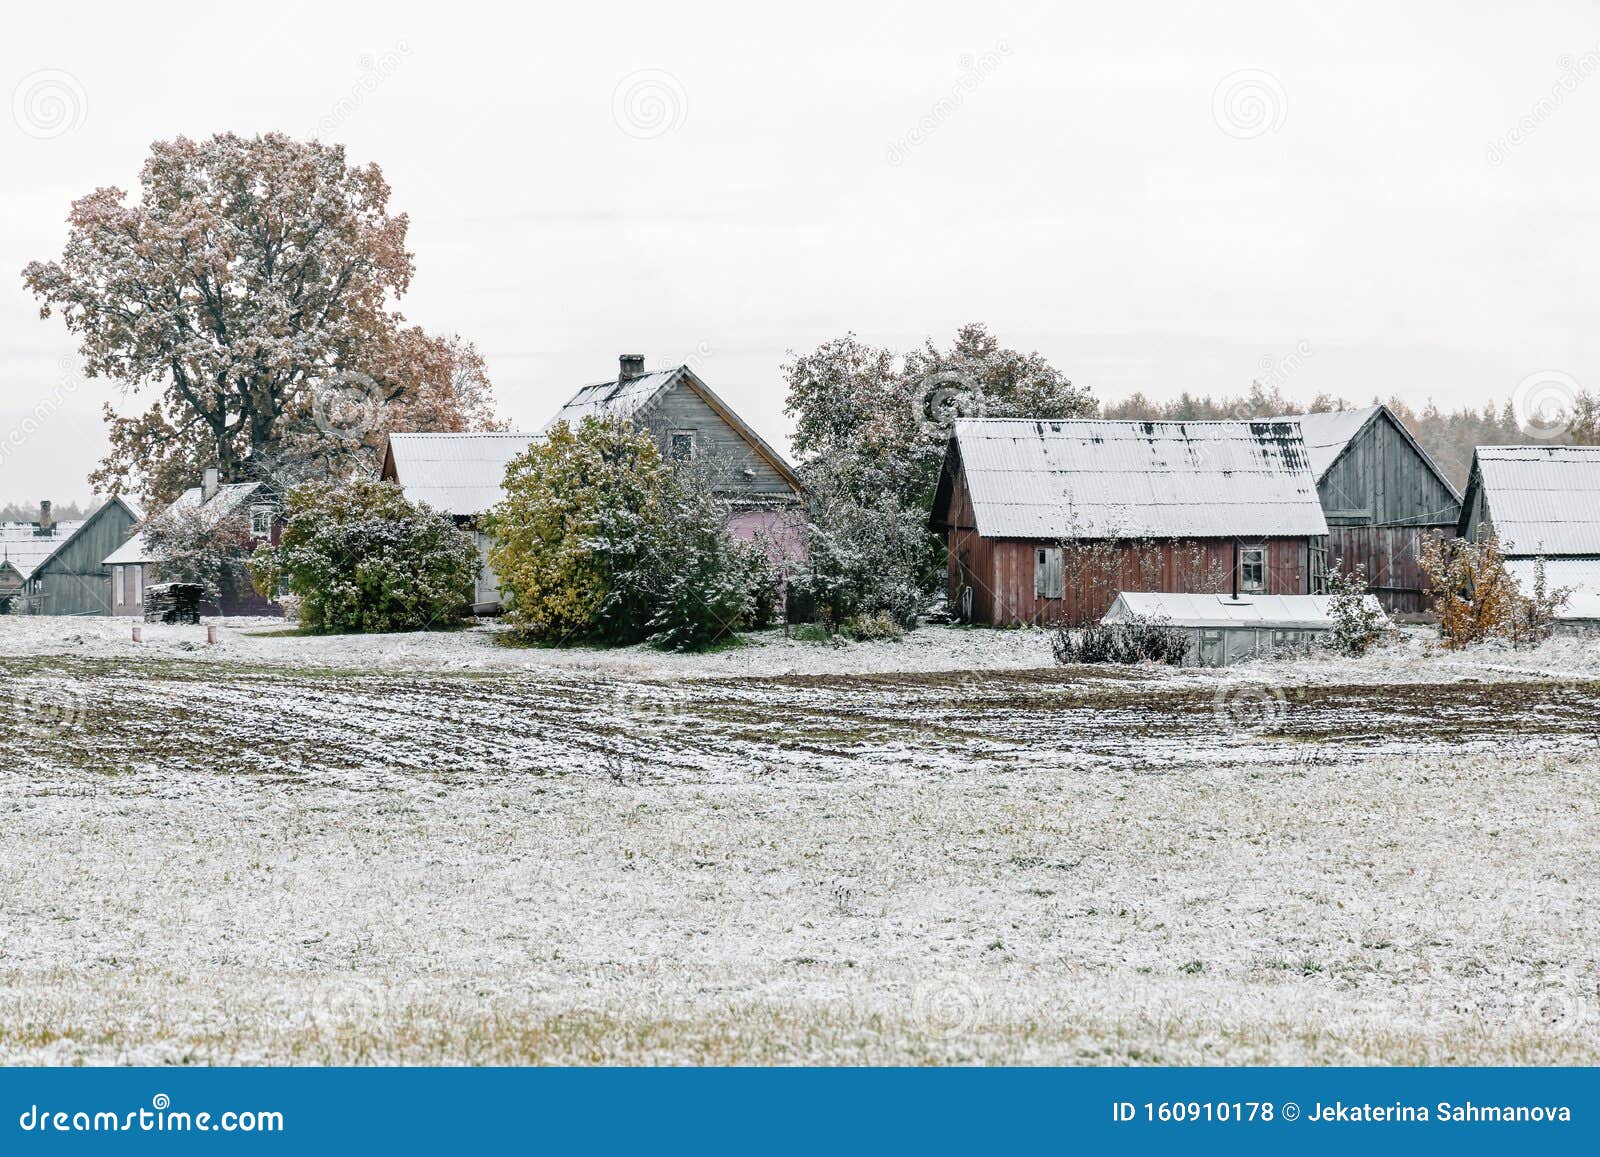 Winter Landscape With First Snow In The Countryside Fields With